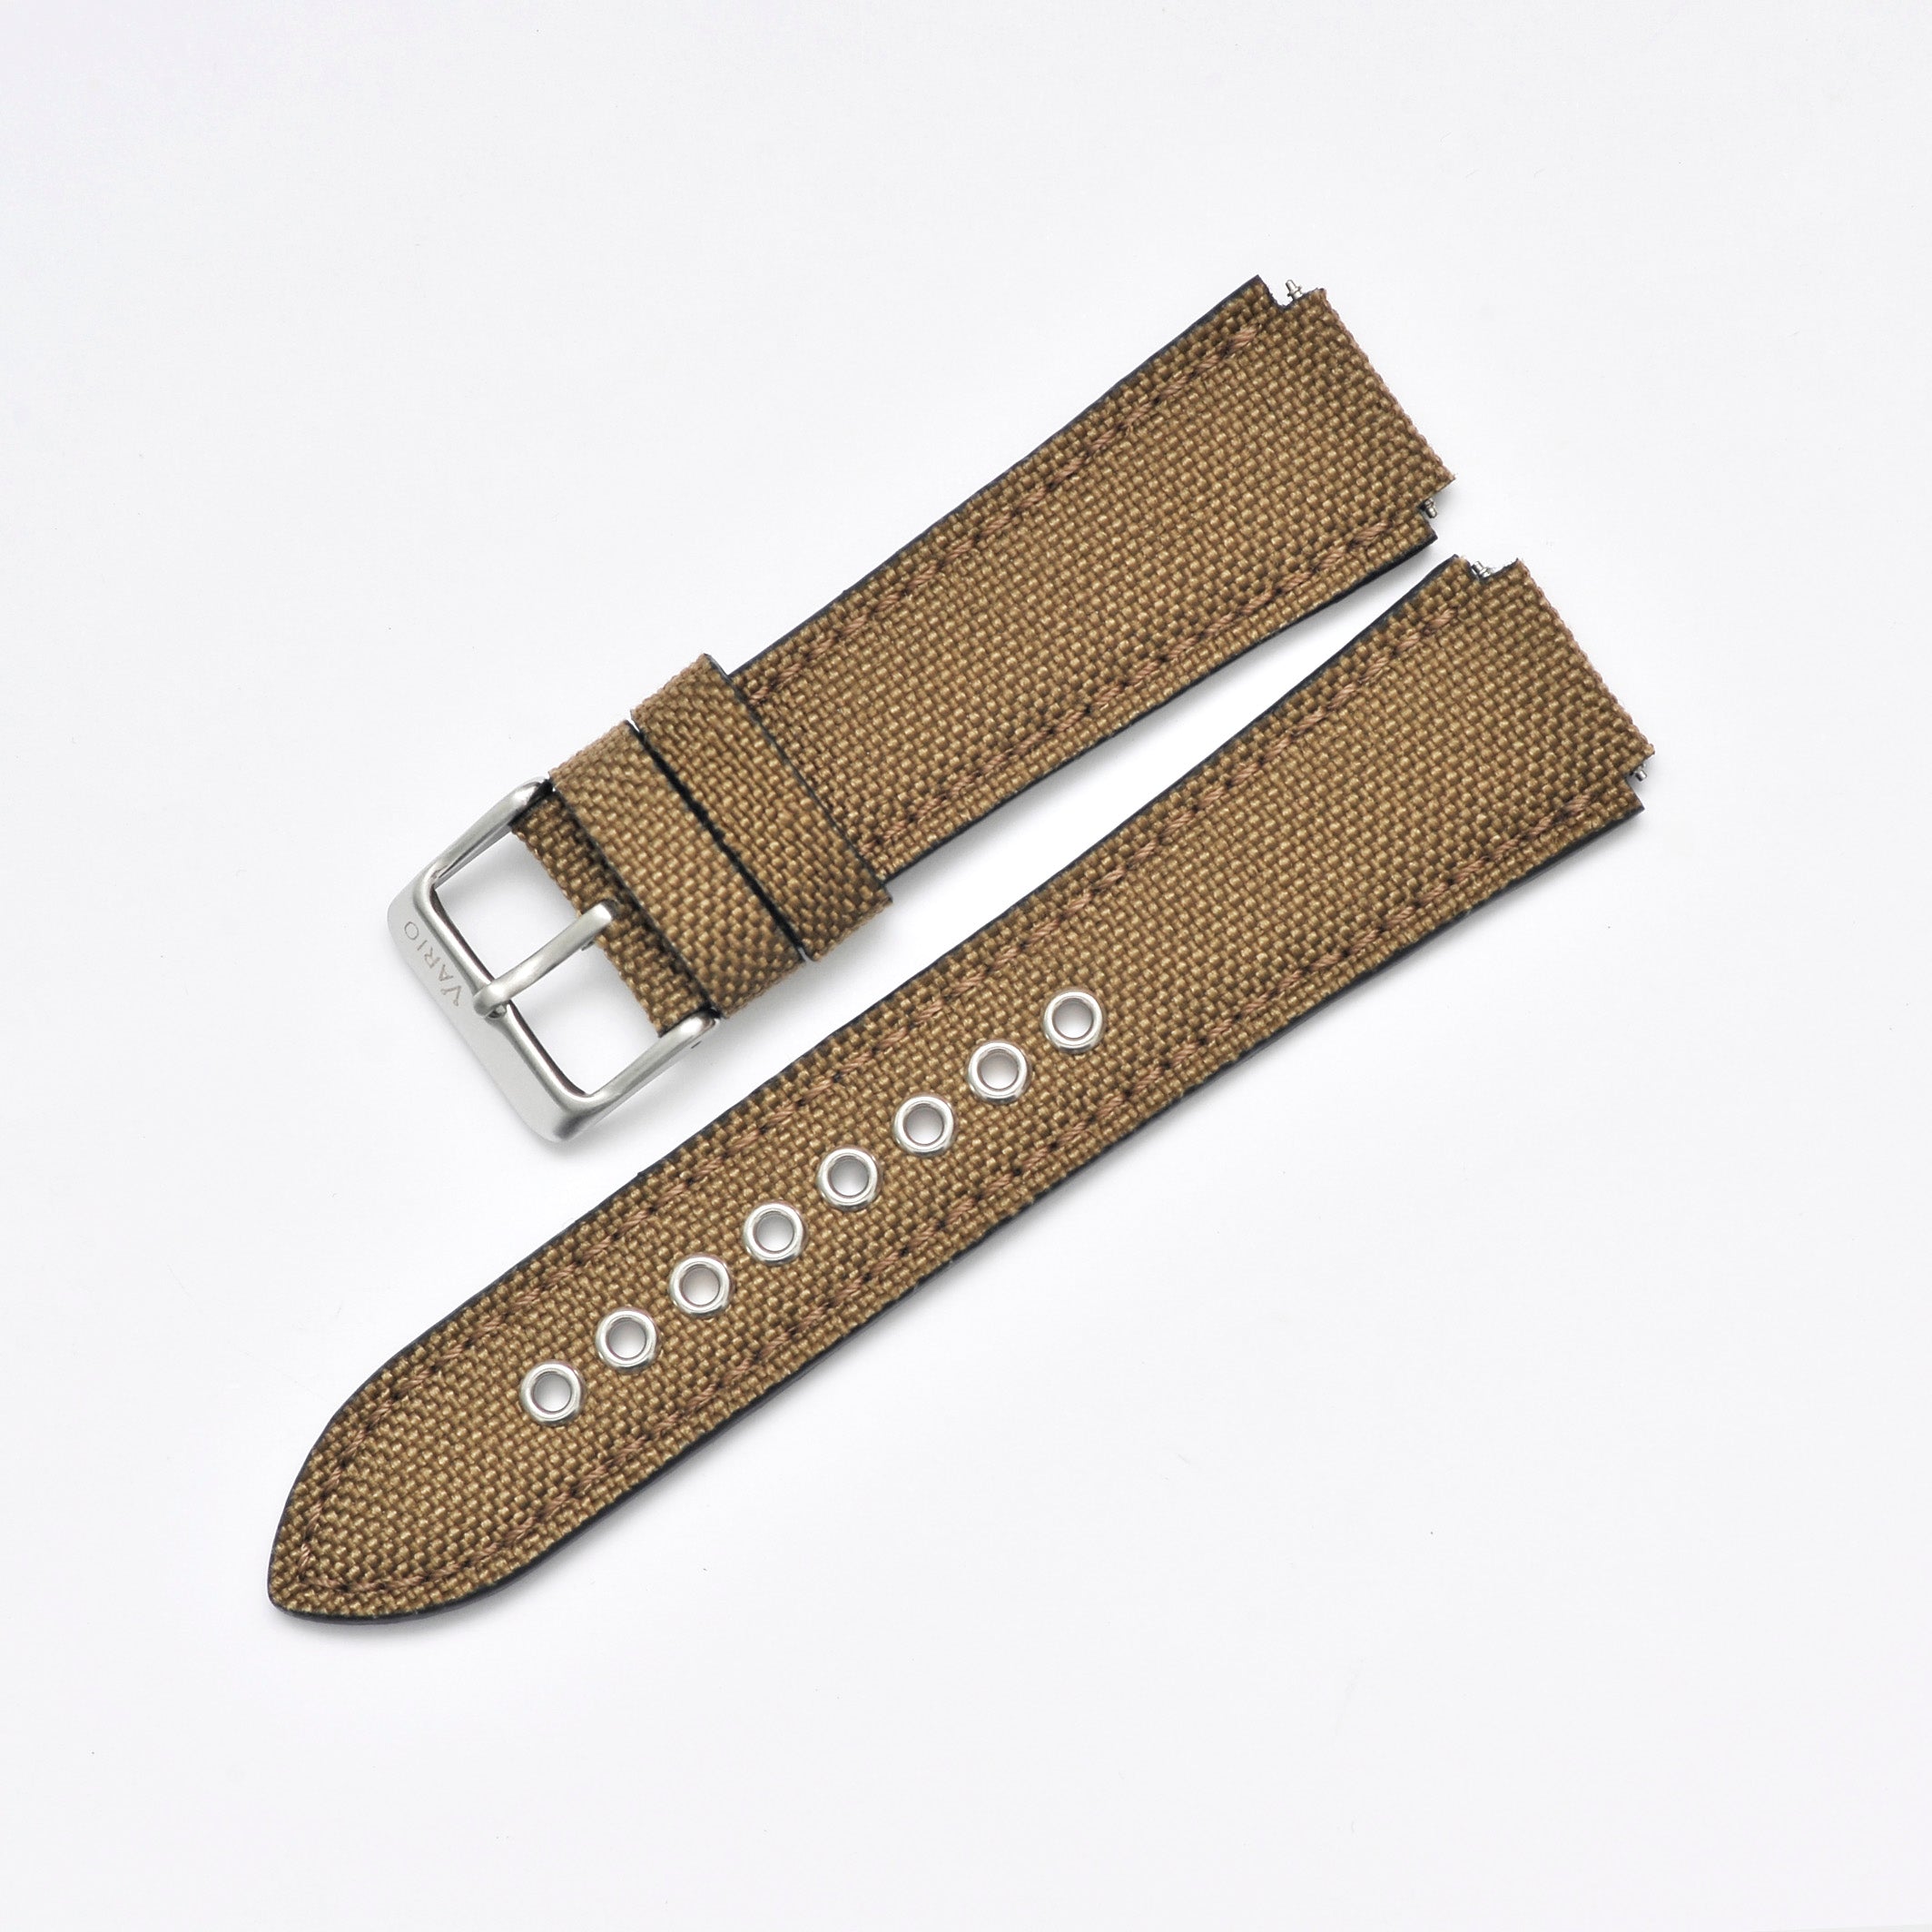 Cordura khaki brown fitted watch strap for Casio Royale AE1200 